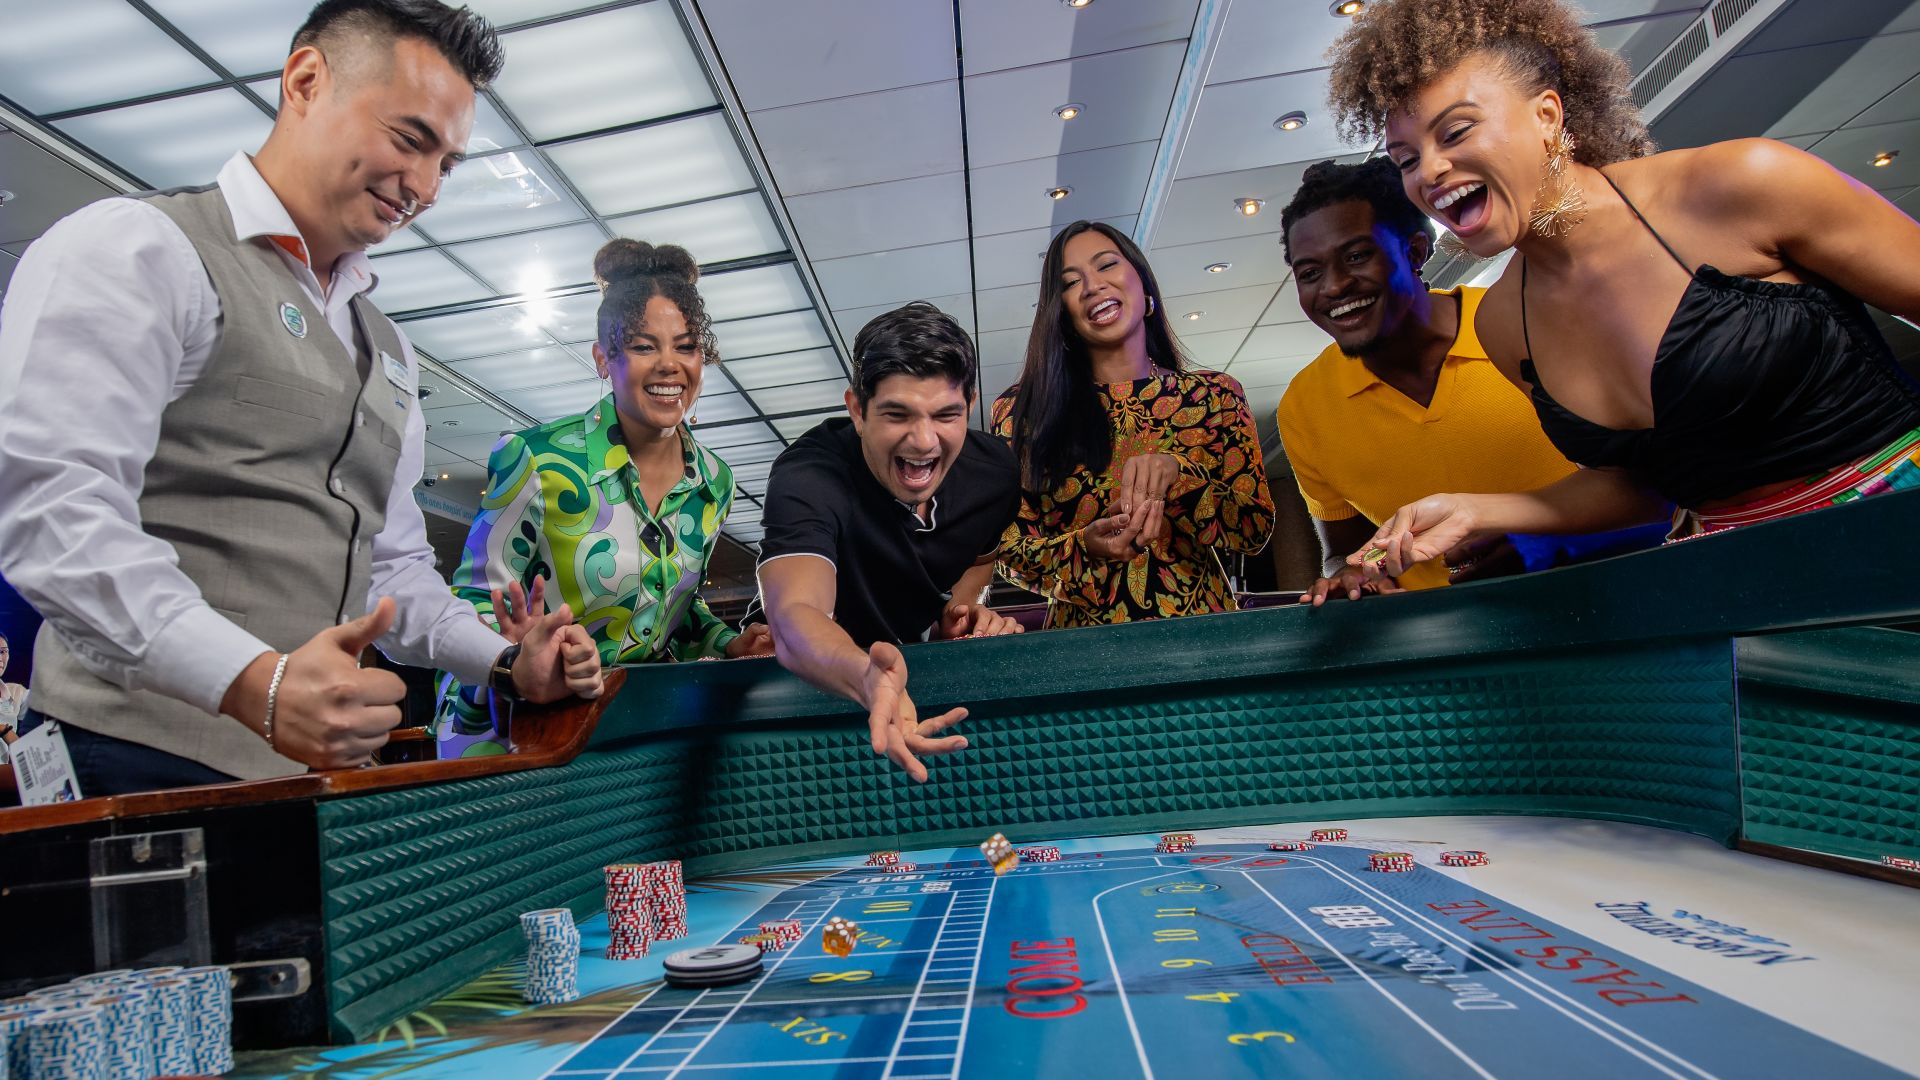 A Group Of People Playing A Game